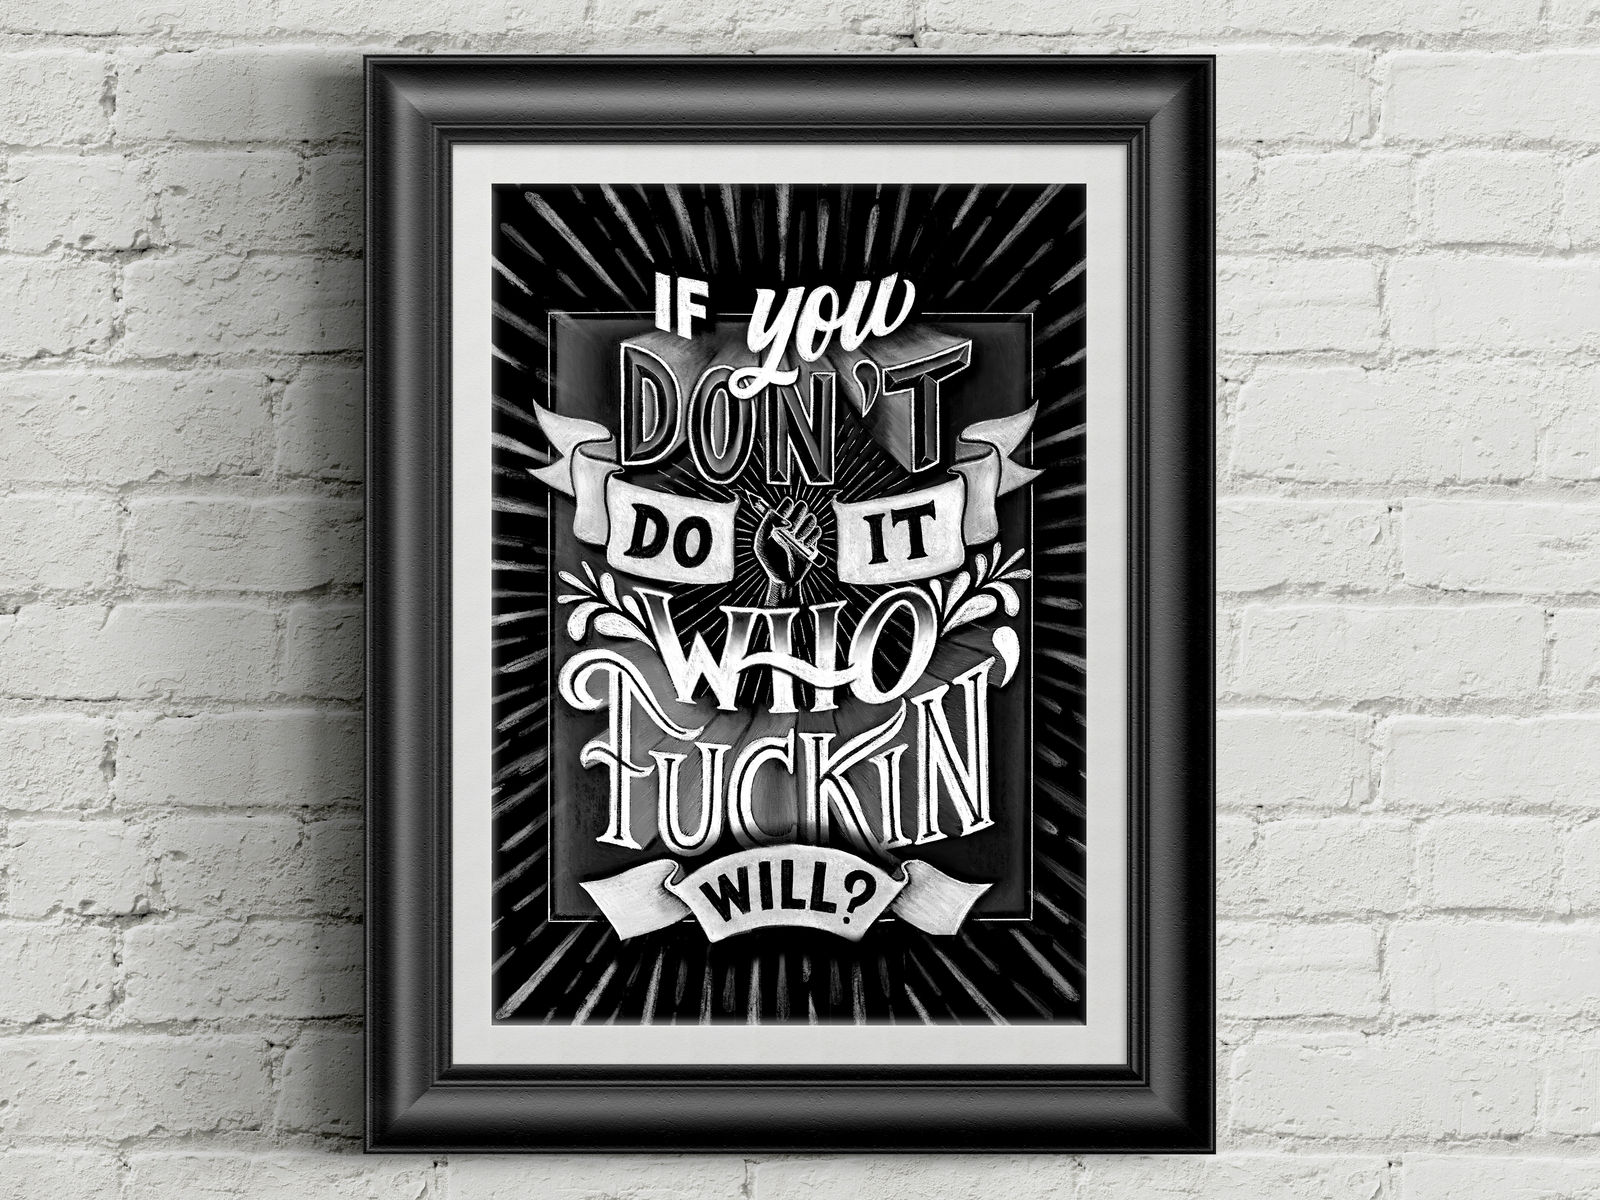 If You Dont Do It, Who F*ckin will? 3d letters chalklettering chalktype design diy illustration ipad pro lettering lettering lettering artist letteringart letteringchallenge modern lettering motivational quotes procreate procreate lettering typography